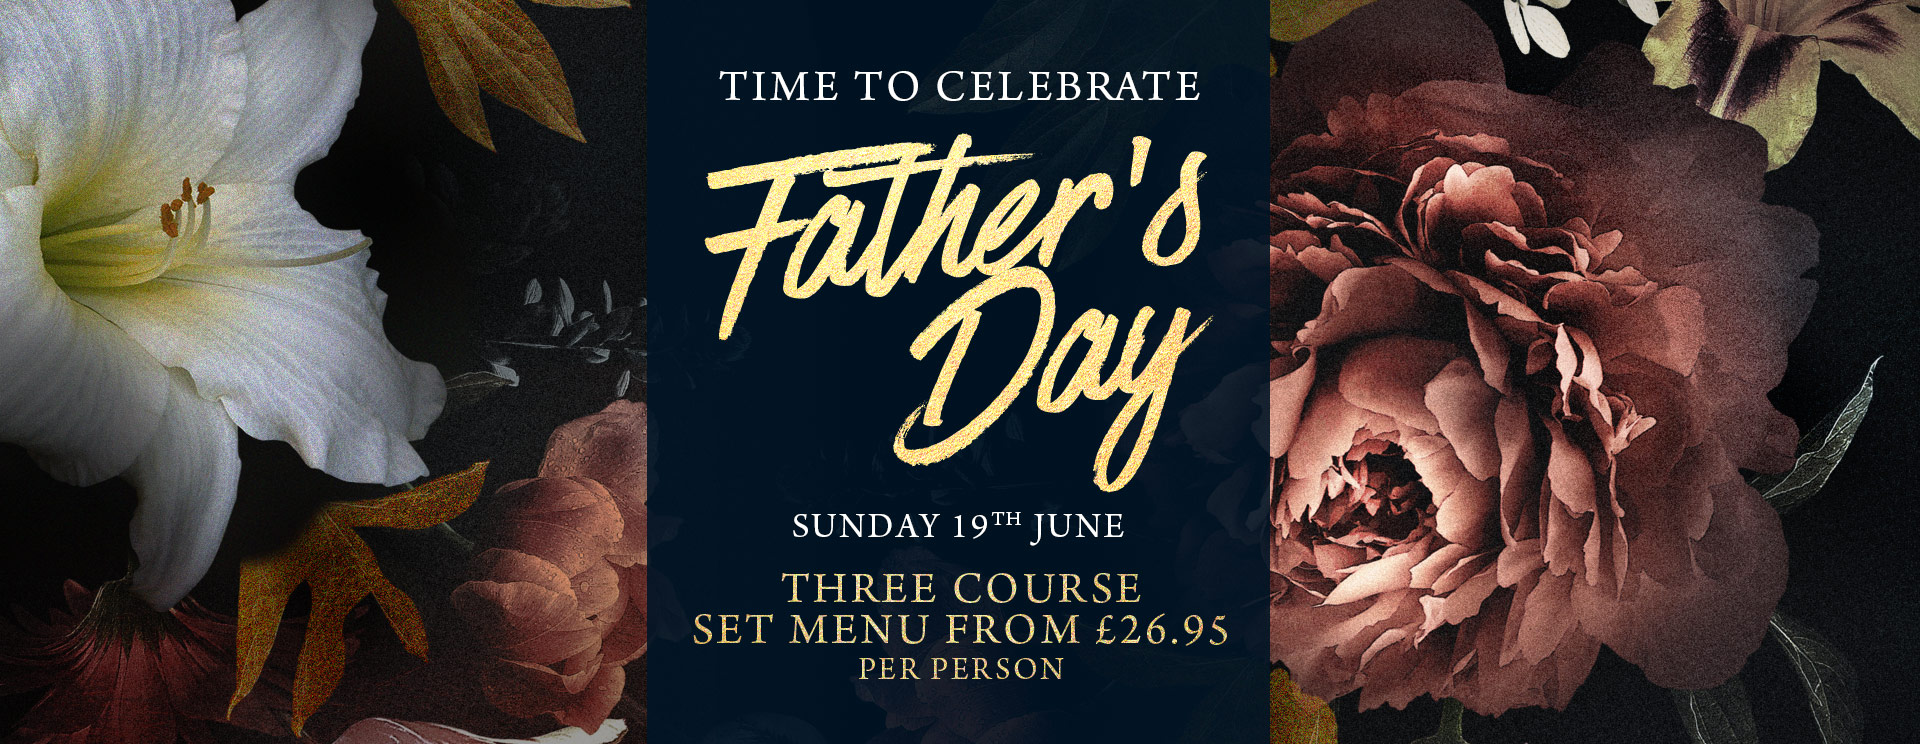 Fathers Day at The Arkle Manor